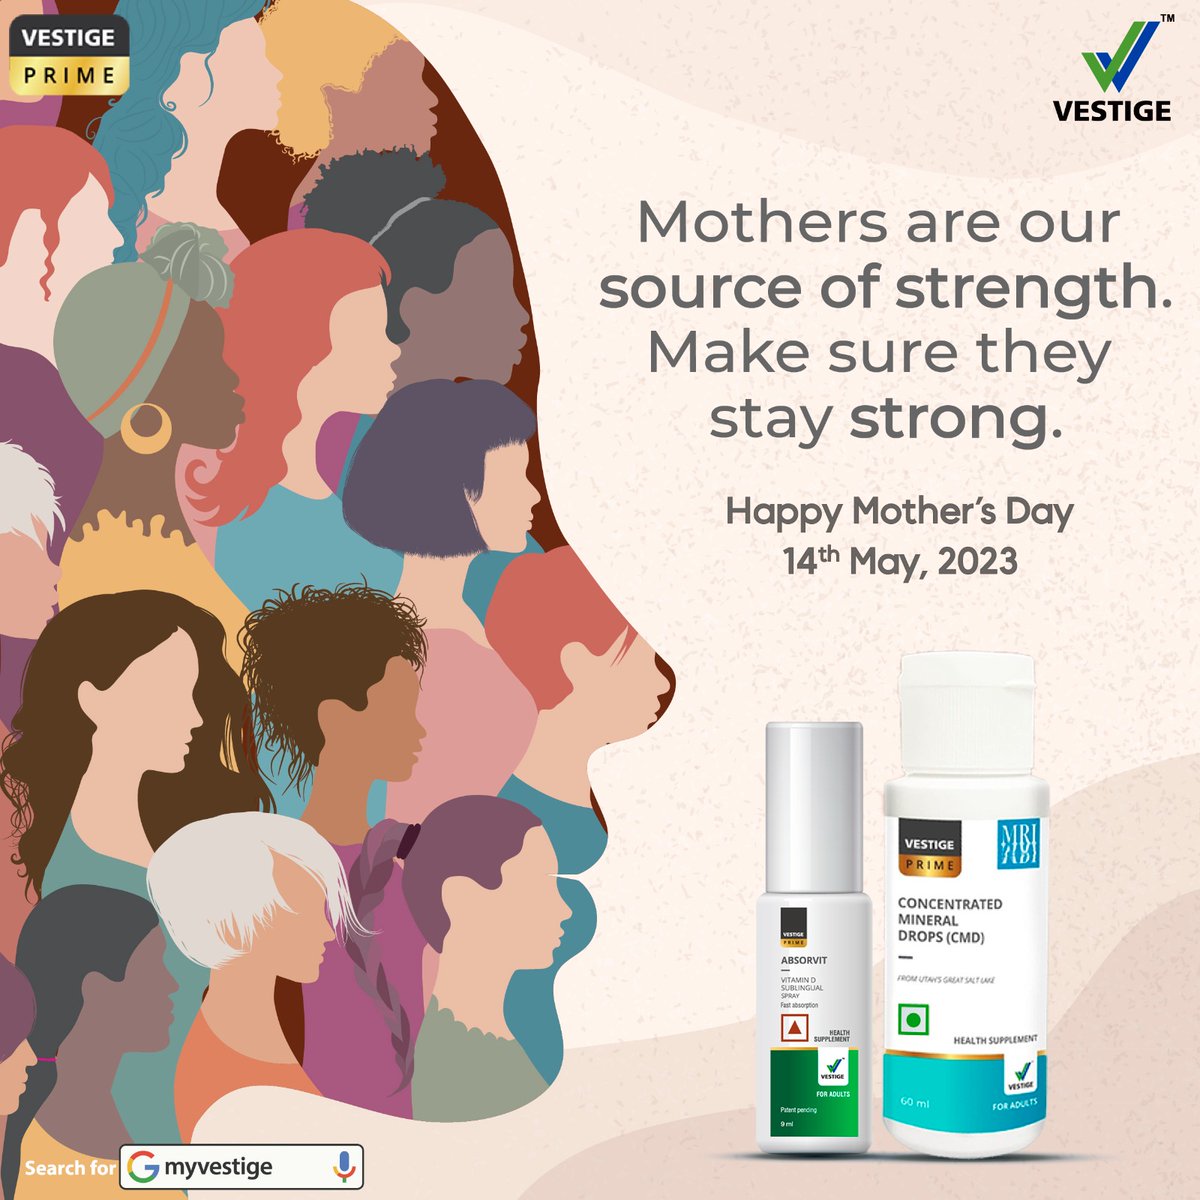 Stronger mothers, stronger India. Let's give mothers a health boost with CMD and Absorvit.

#WishYouWellth #happymothersday #aborvit #cmd